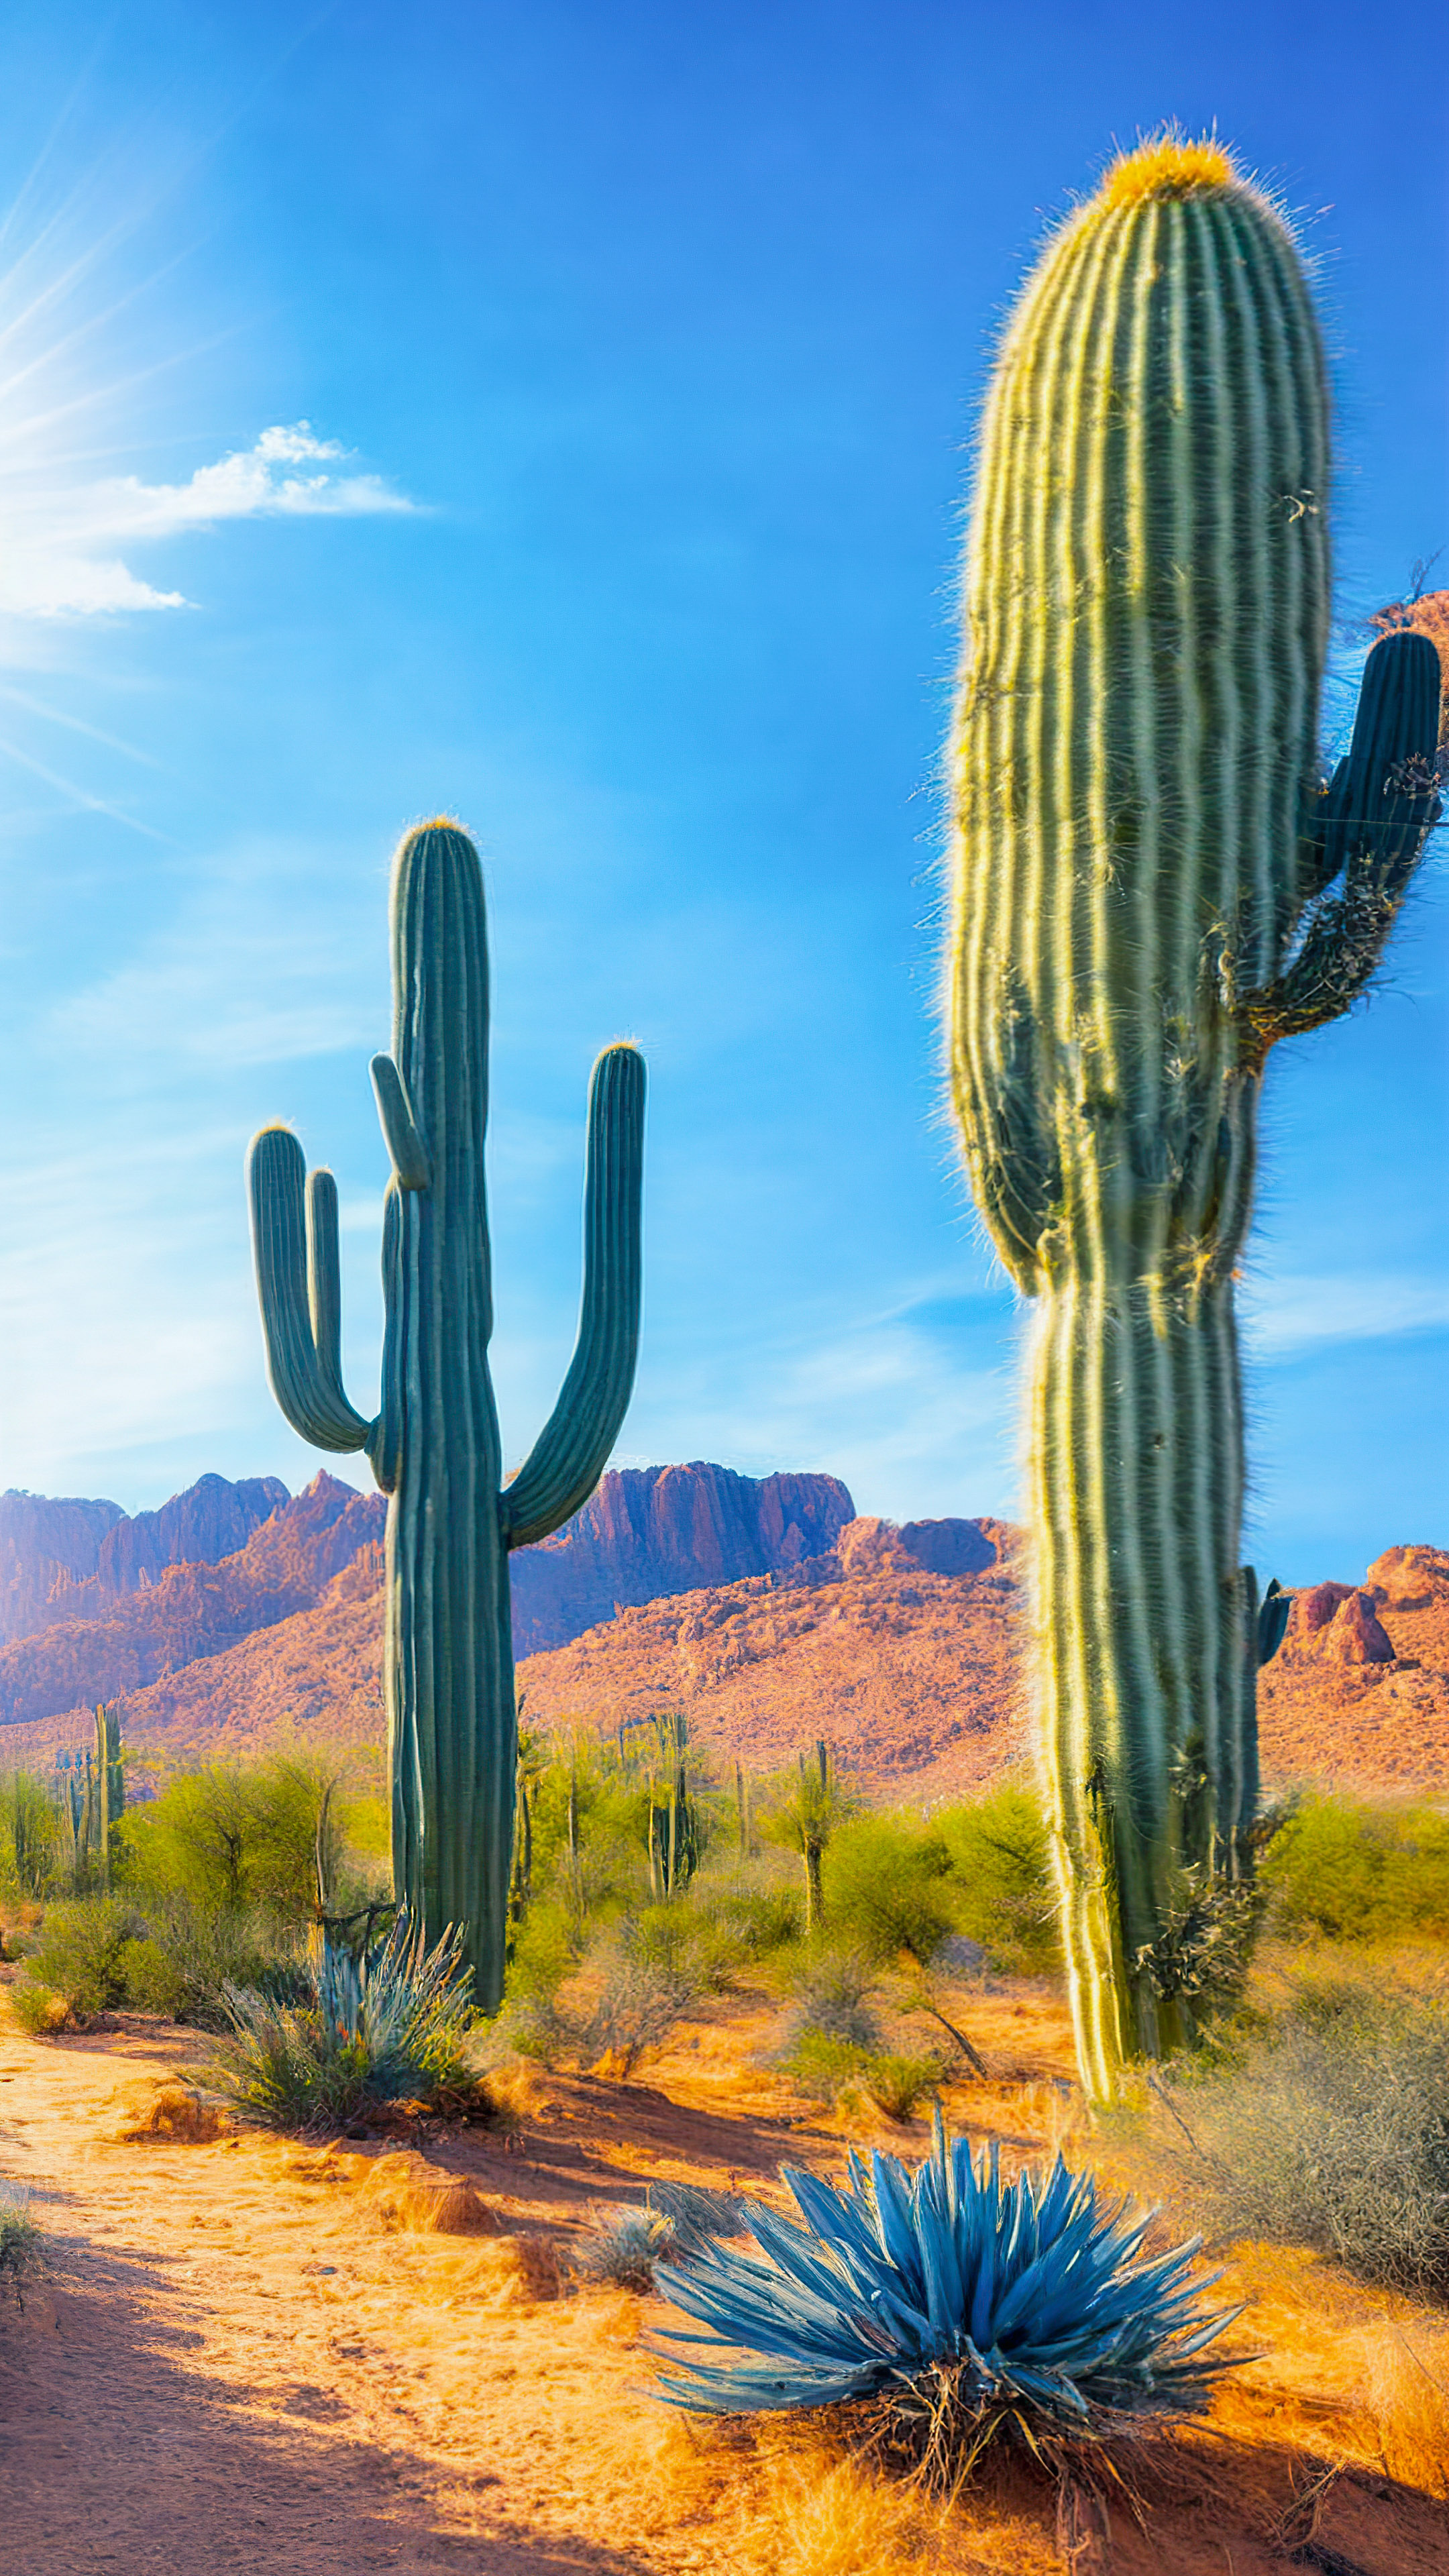 Delight in the splendor of our 4K nature wallpaper for iPhone, featuring a sun-drenched desert landscape with towering saguaro cacti and endless blue skies.